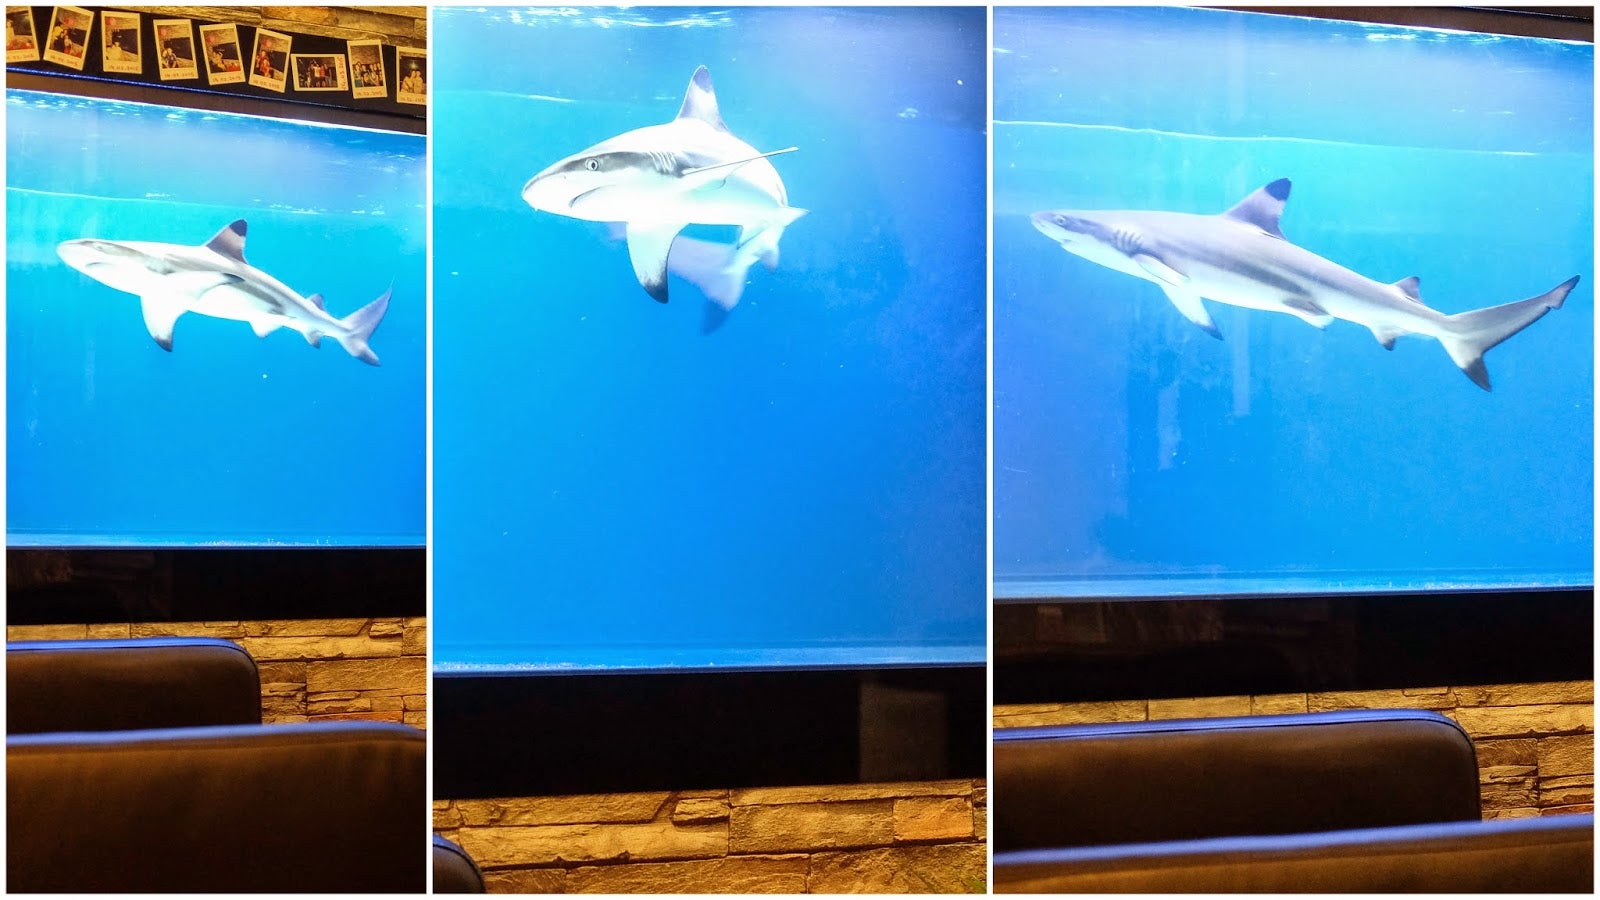 Video Of Near Threatened Shark In Aquarium At Sri Petaling Cafe Outrages Malaysians - World Of Buzz